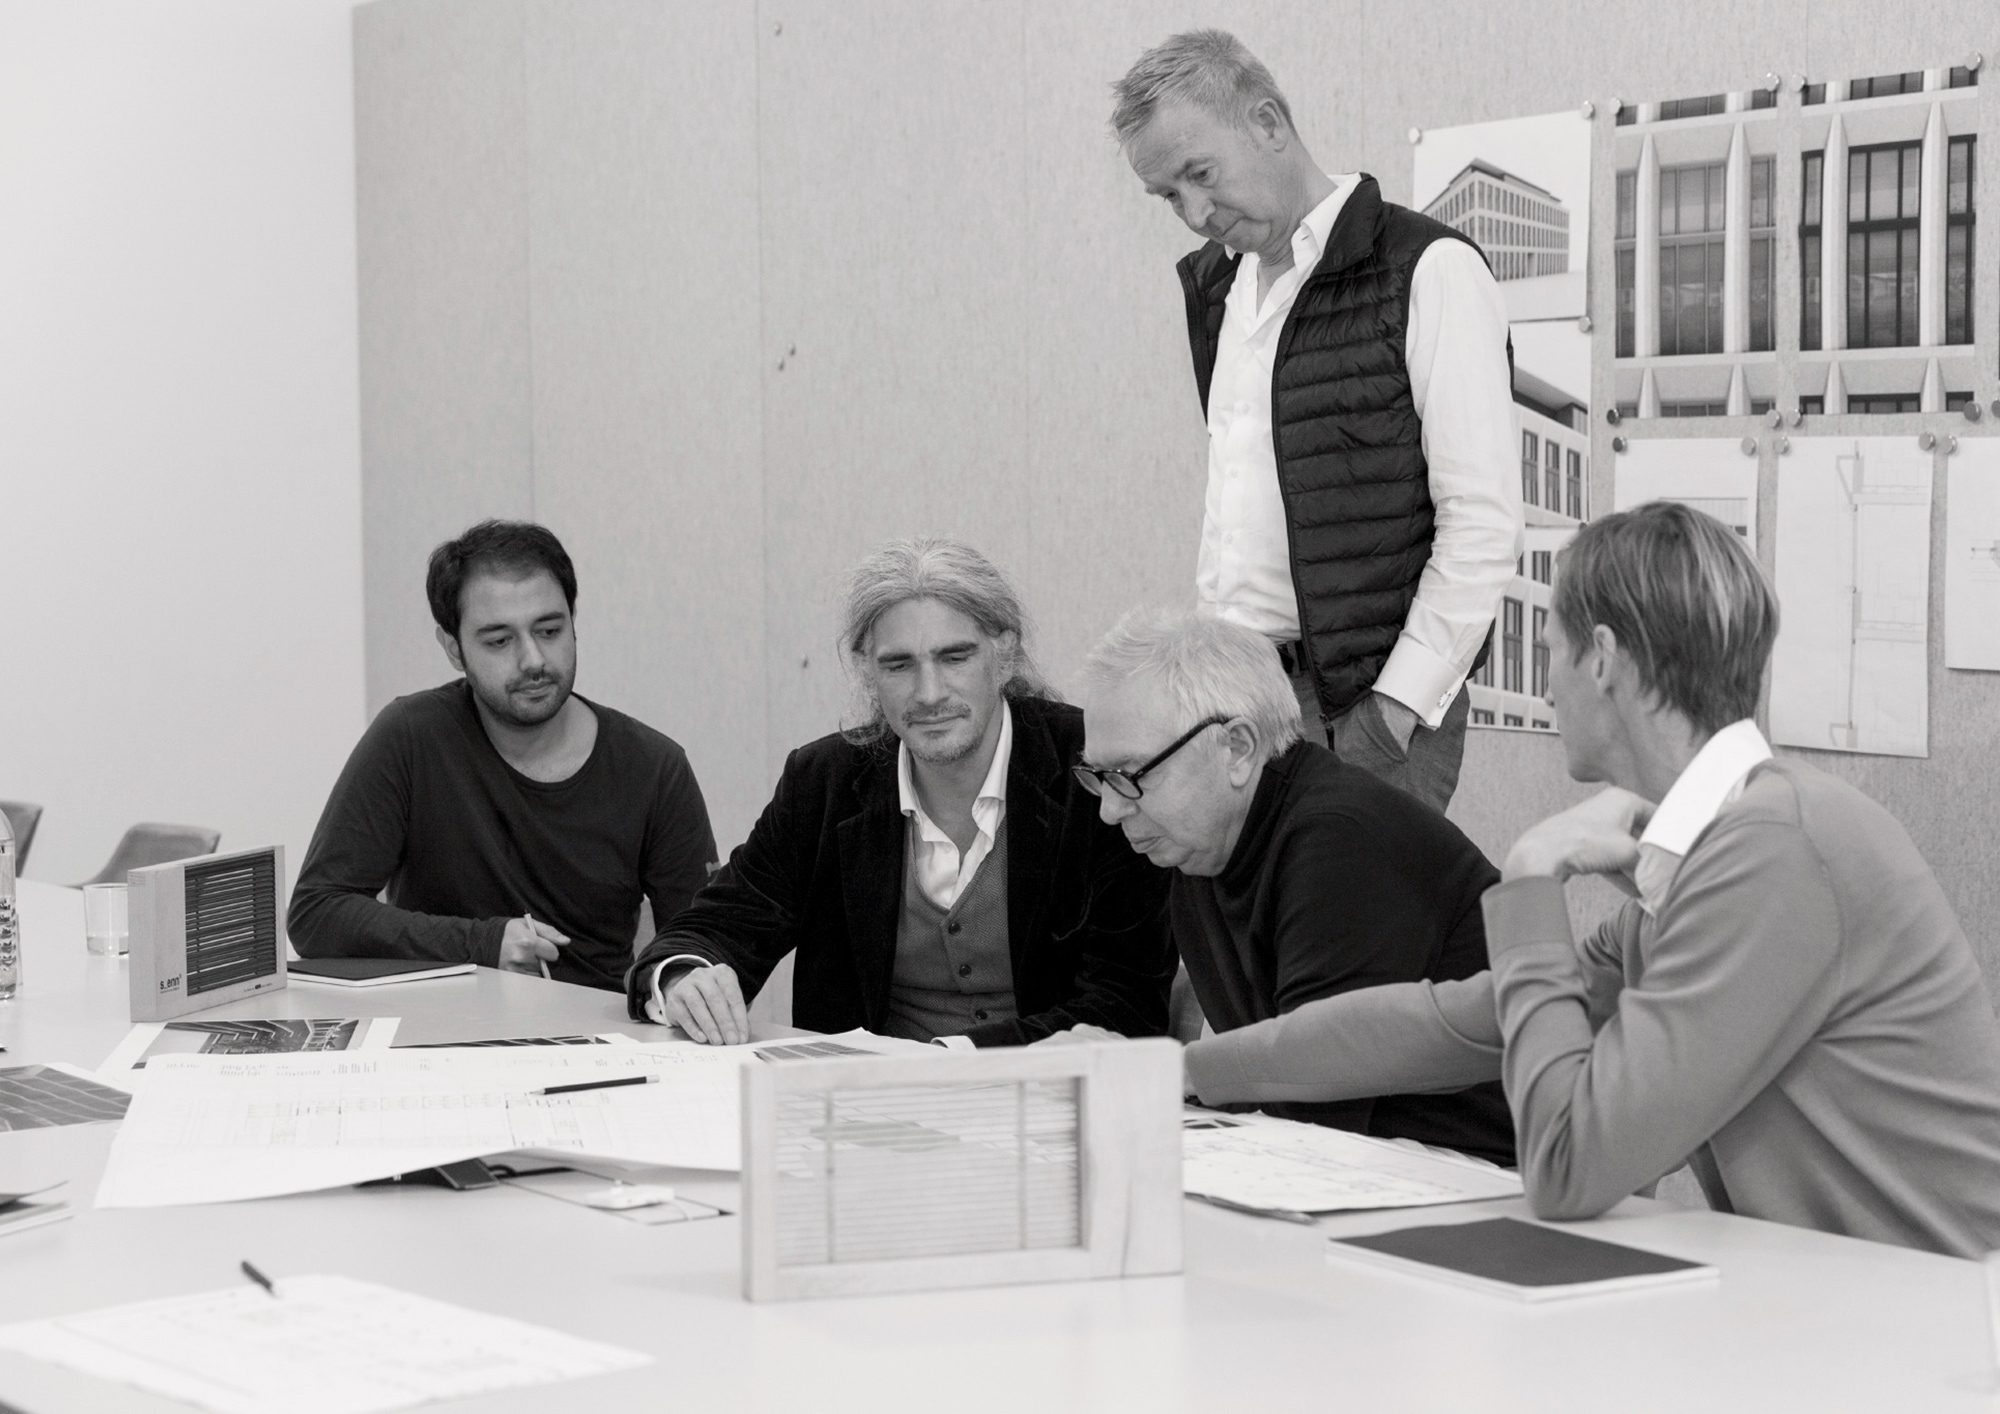 David Chipperfield and the KARL team working on the facade